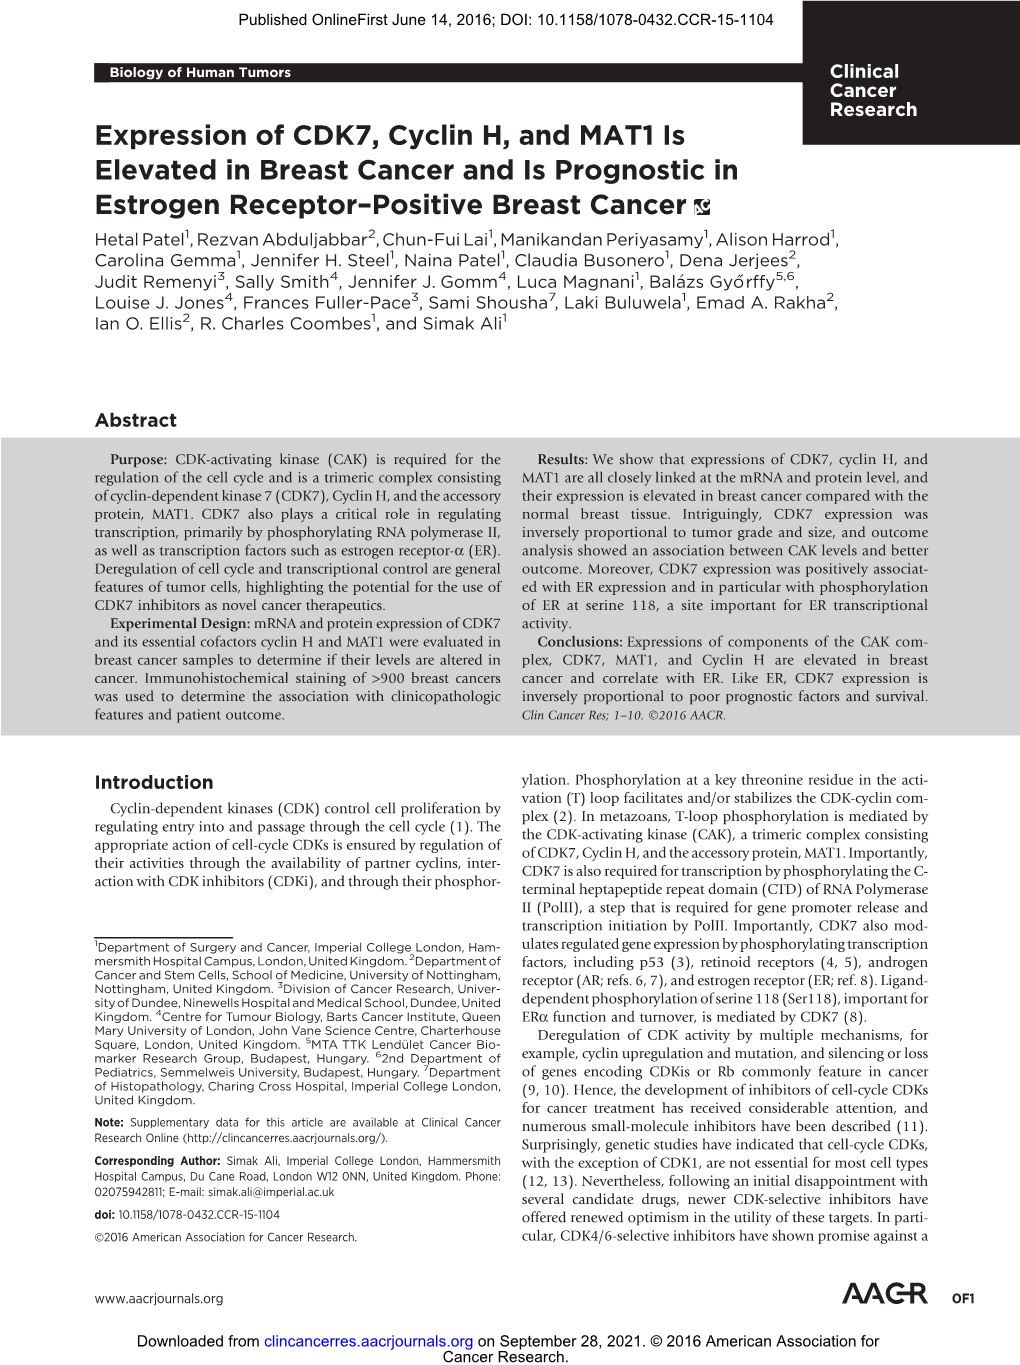 Expression of CDK7, Cyclin H, and MAT1 Is Elevated in Breast Cancer and Is Prognostic in Estrogen Receptor–Positive Breast